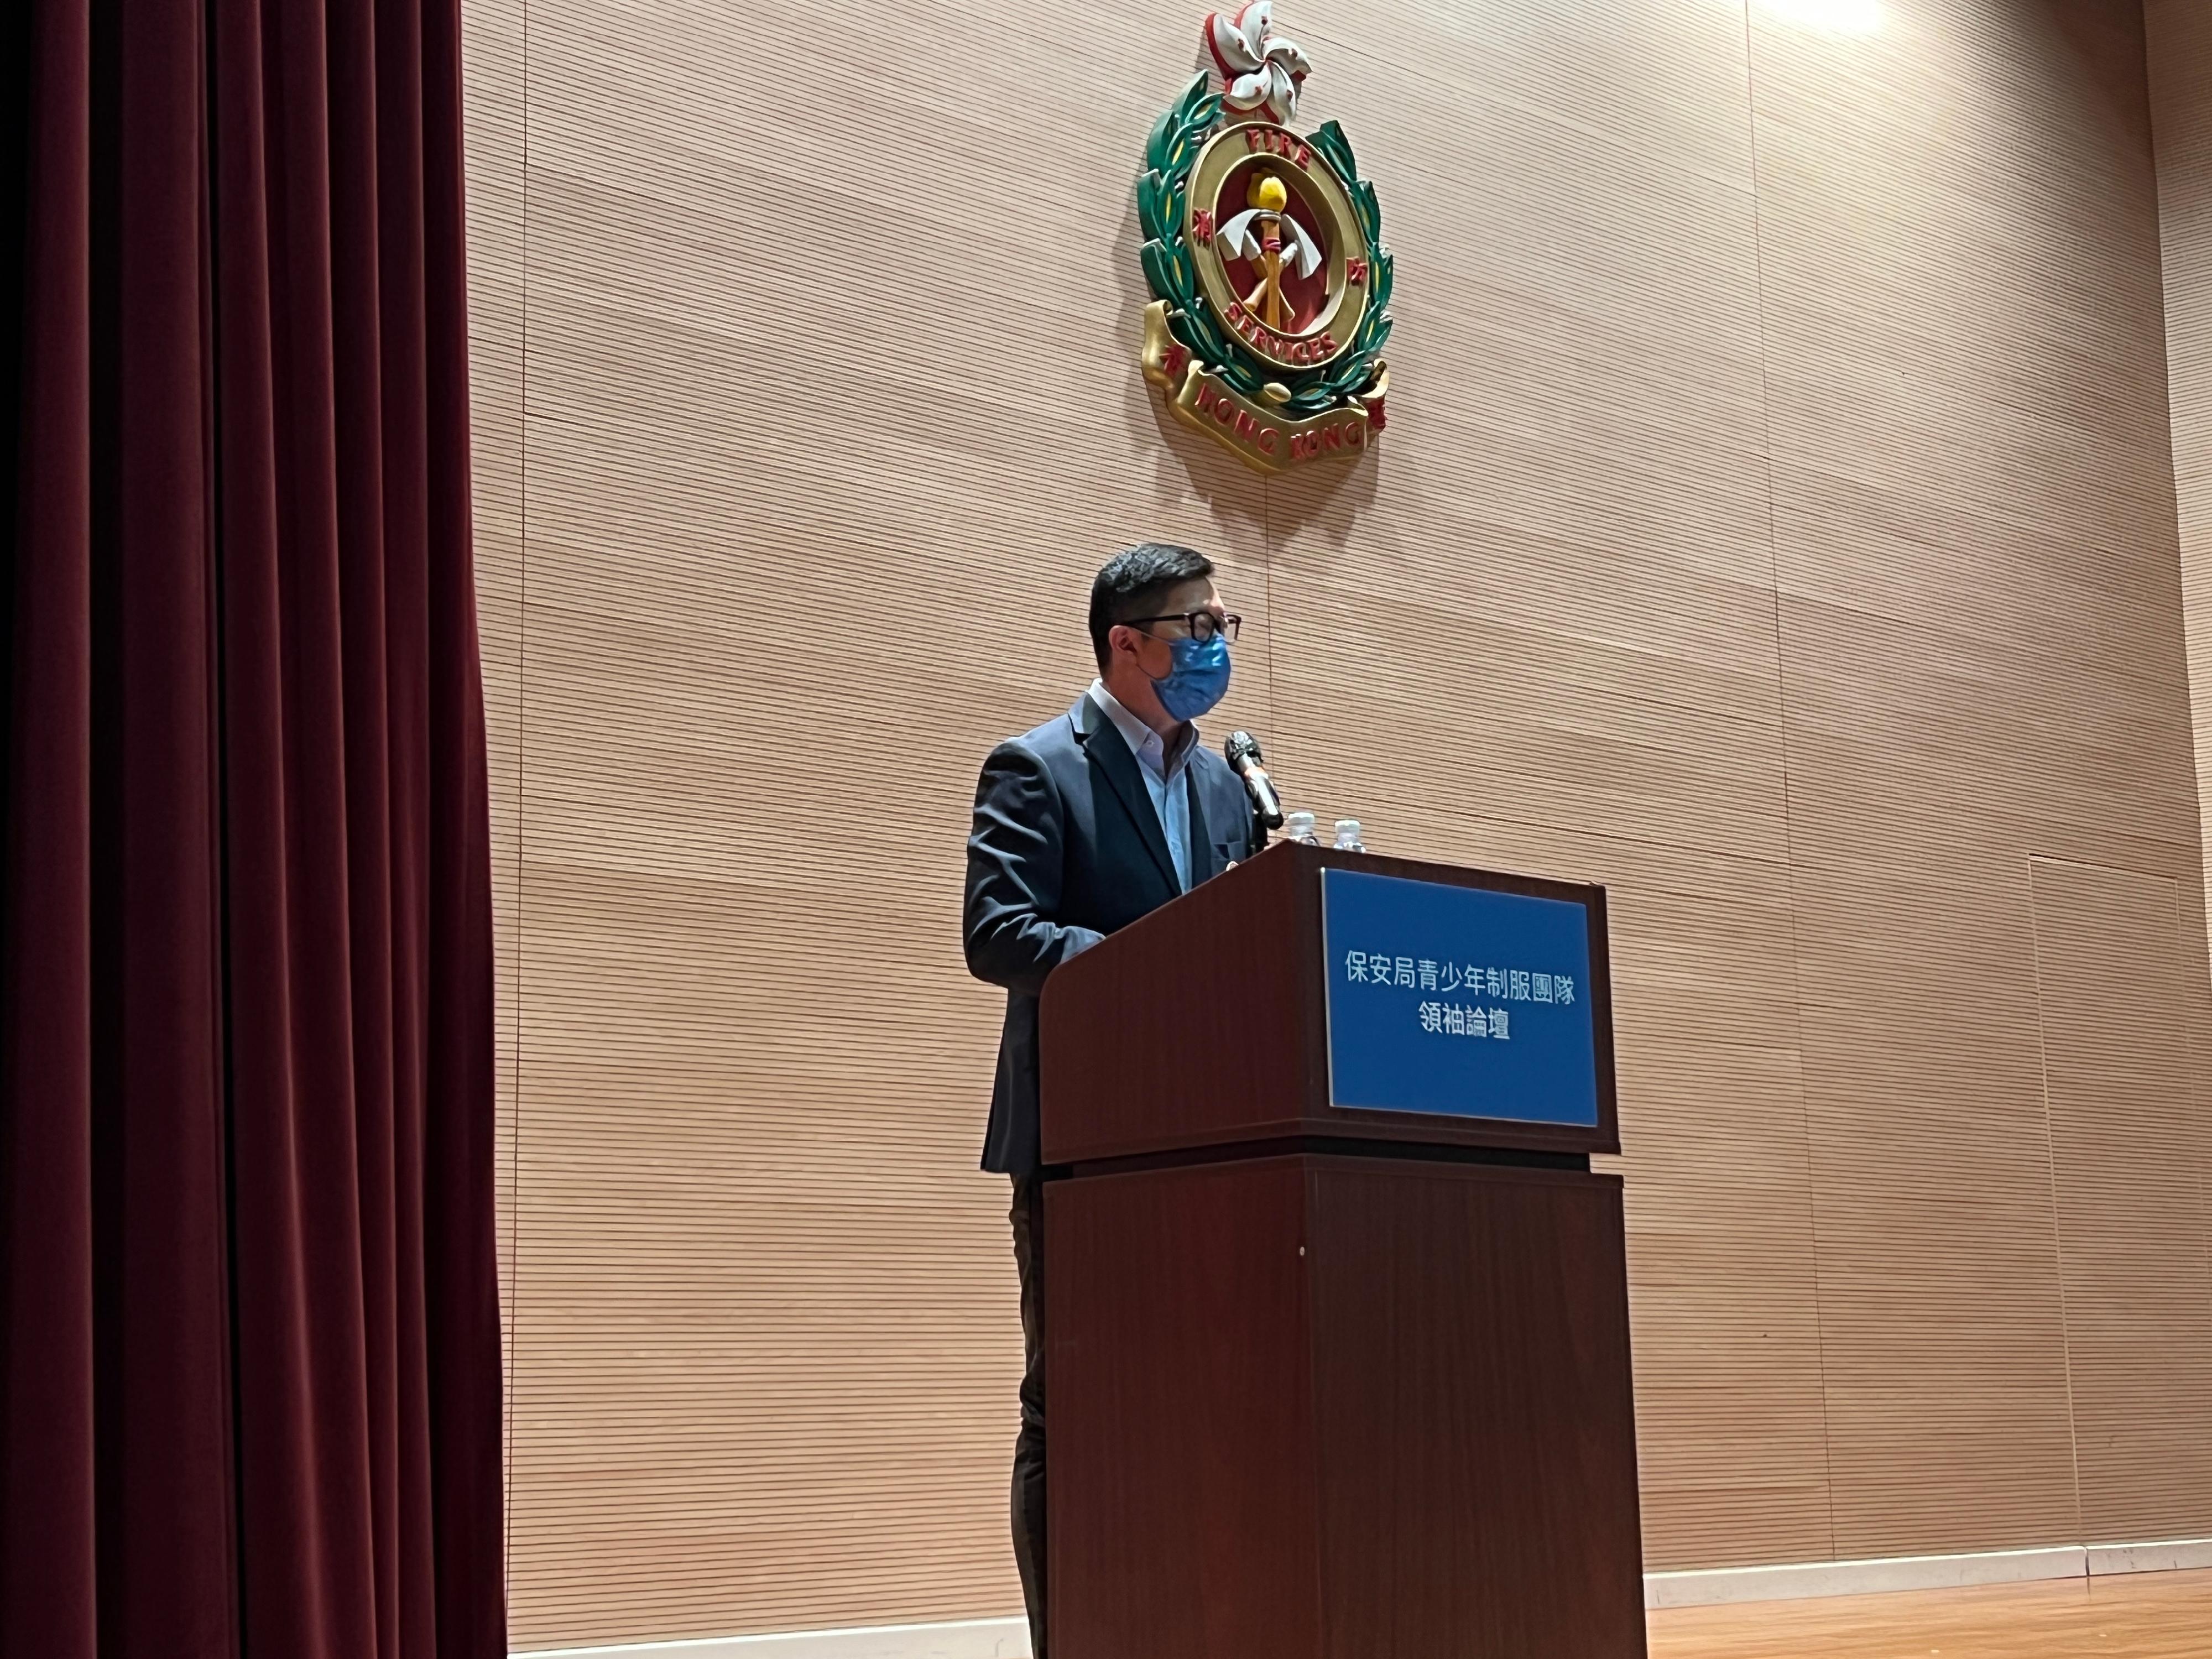 The Security Bureau today (October 22) held a two-day, one-night induction course at the Fire and Ambulance Services Academy in Tseung Kwan O for members of the Security Bureau Youth Uniformed Group Leaders Forum. Photo shows the Secretary for Security, Mr Tang Ping-keung sharing with members his experience in serving the community during his 30-odd years of public service.
